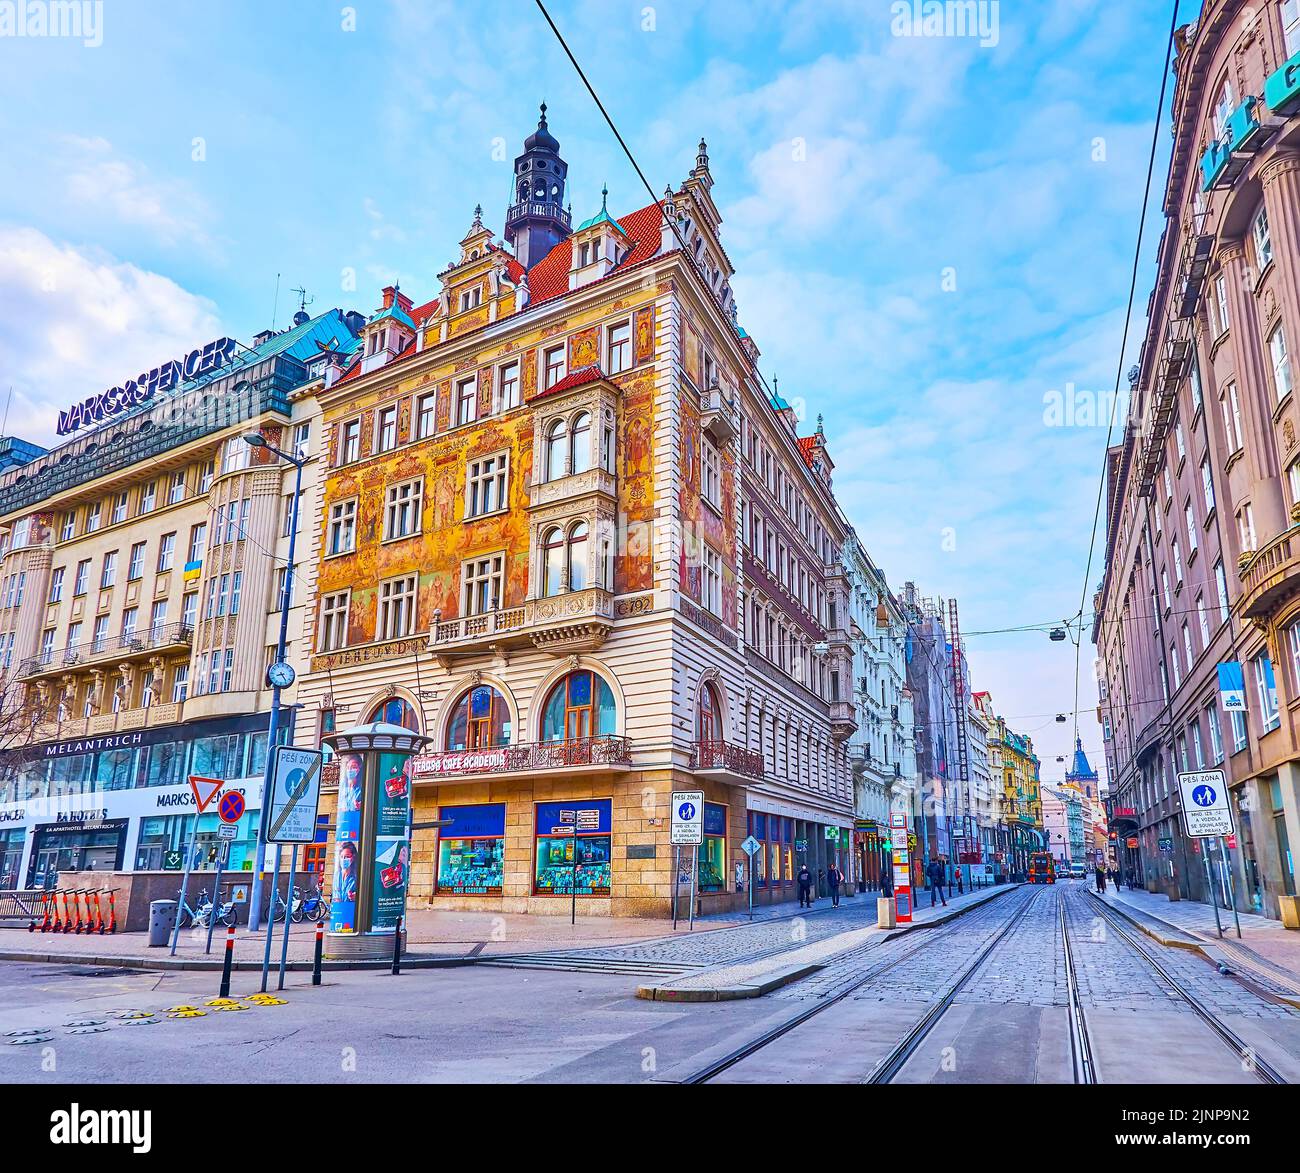 PRAGUE, CZECH REPUBLIC - MARCH 6, 2022: The colored frescoed Wiehl House on the corner of Wenceslas Square and Vodickova Street, on March 6 in Prague Stock Photo